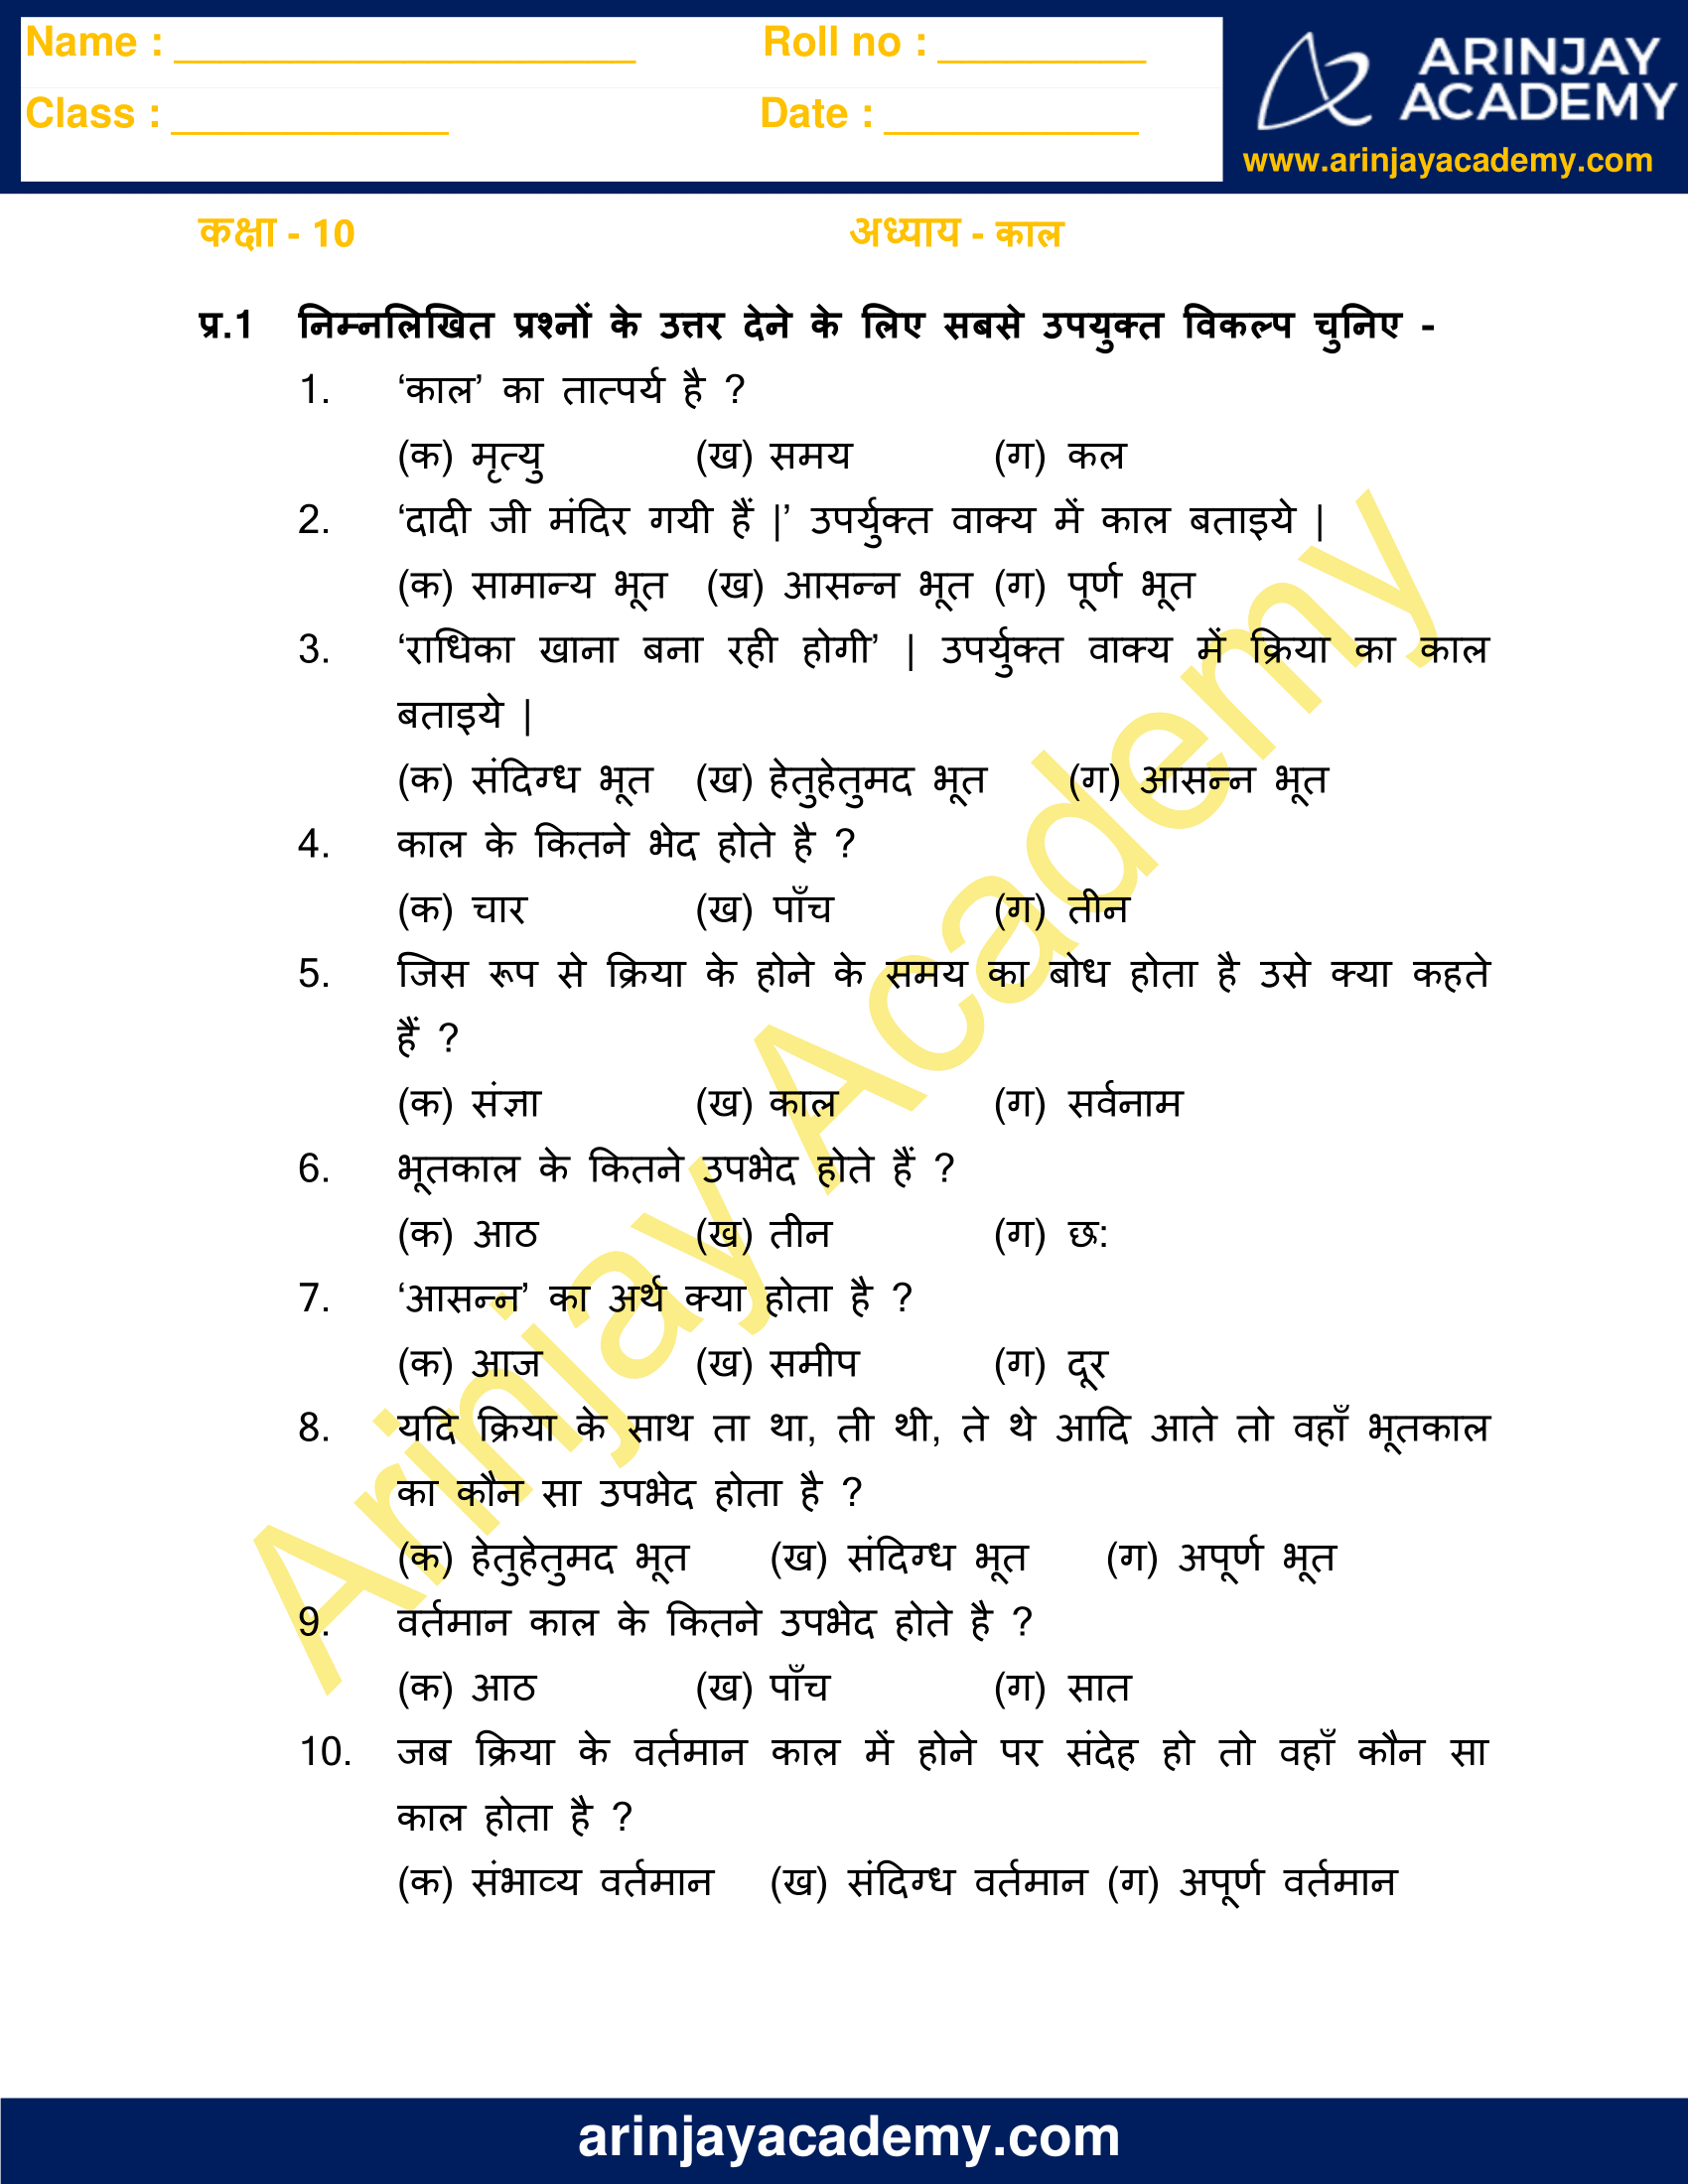 Kaal Worksheet in Hindi for Class 10 image 1